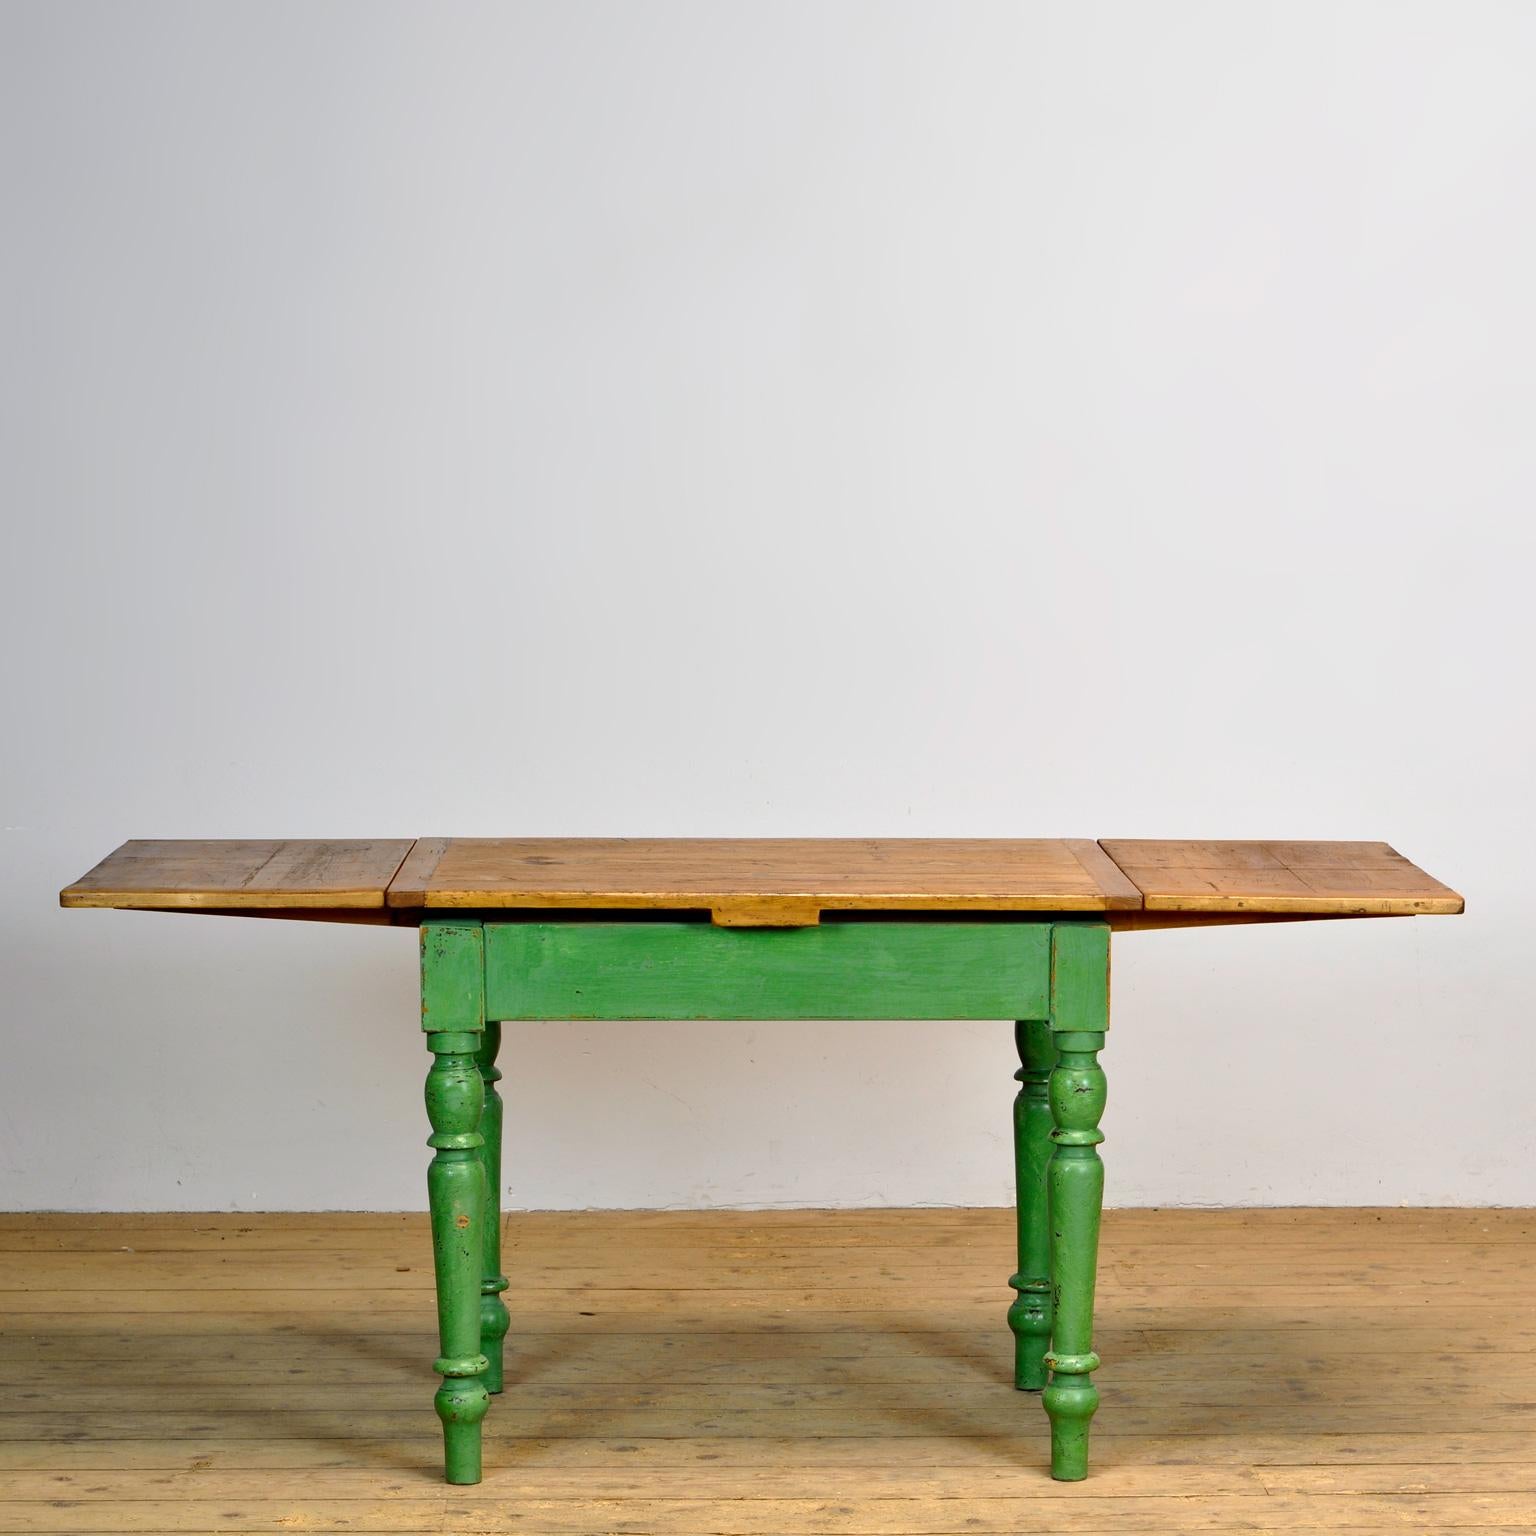 Rustic Pine Table with Extendable Top, 1930s